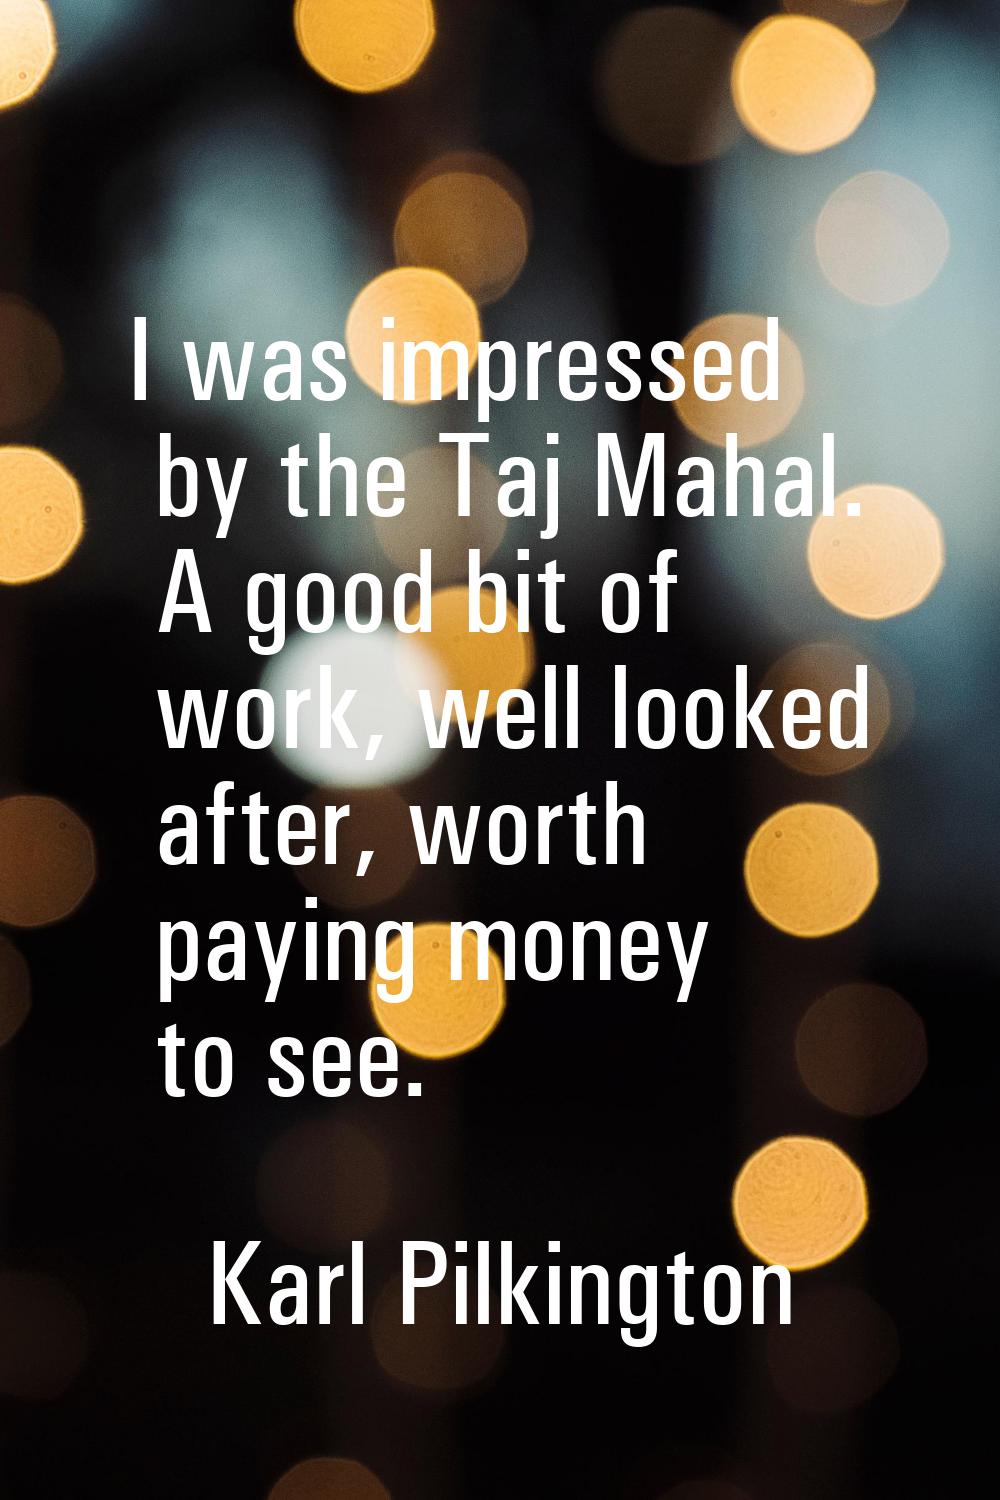 I was impressed by the Taj Mahal. A good bit of work, well looked after, worth paying money to see.